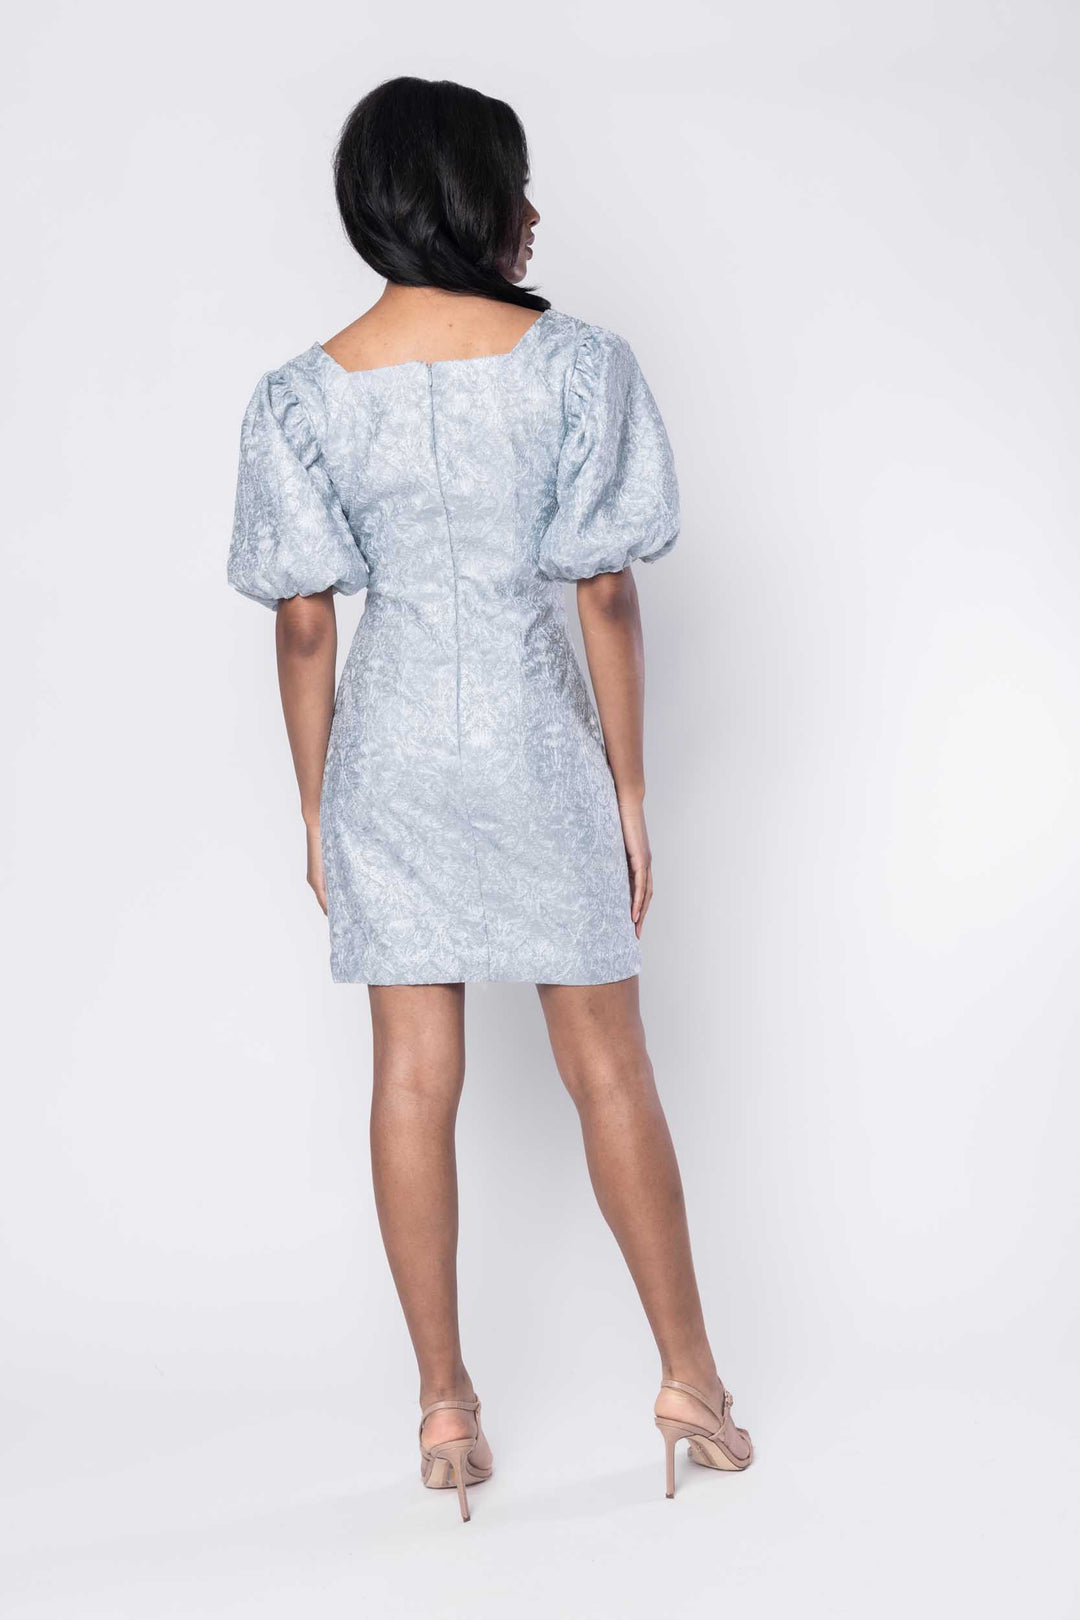 Beautiful model in a pale blue beaded ornate cocktail dress by Sujata Gazder - back view